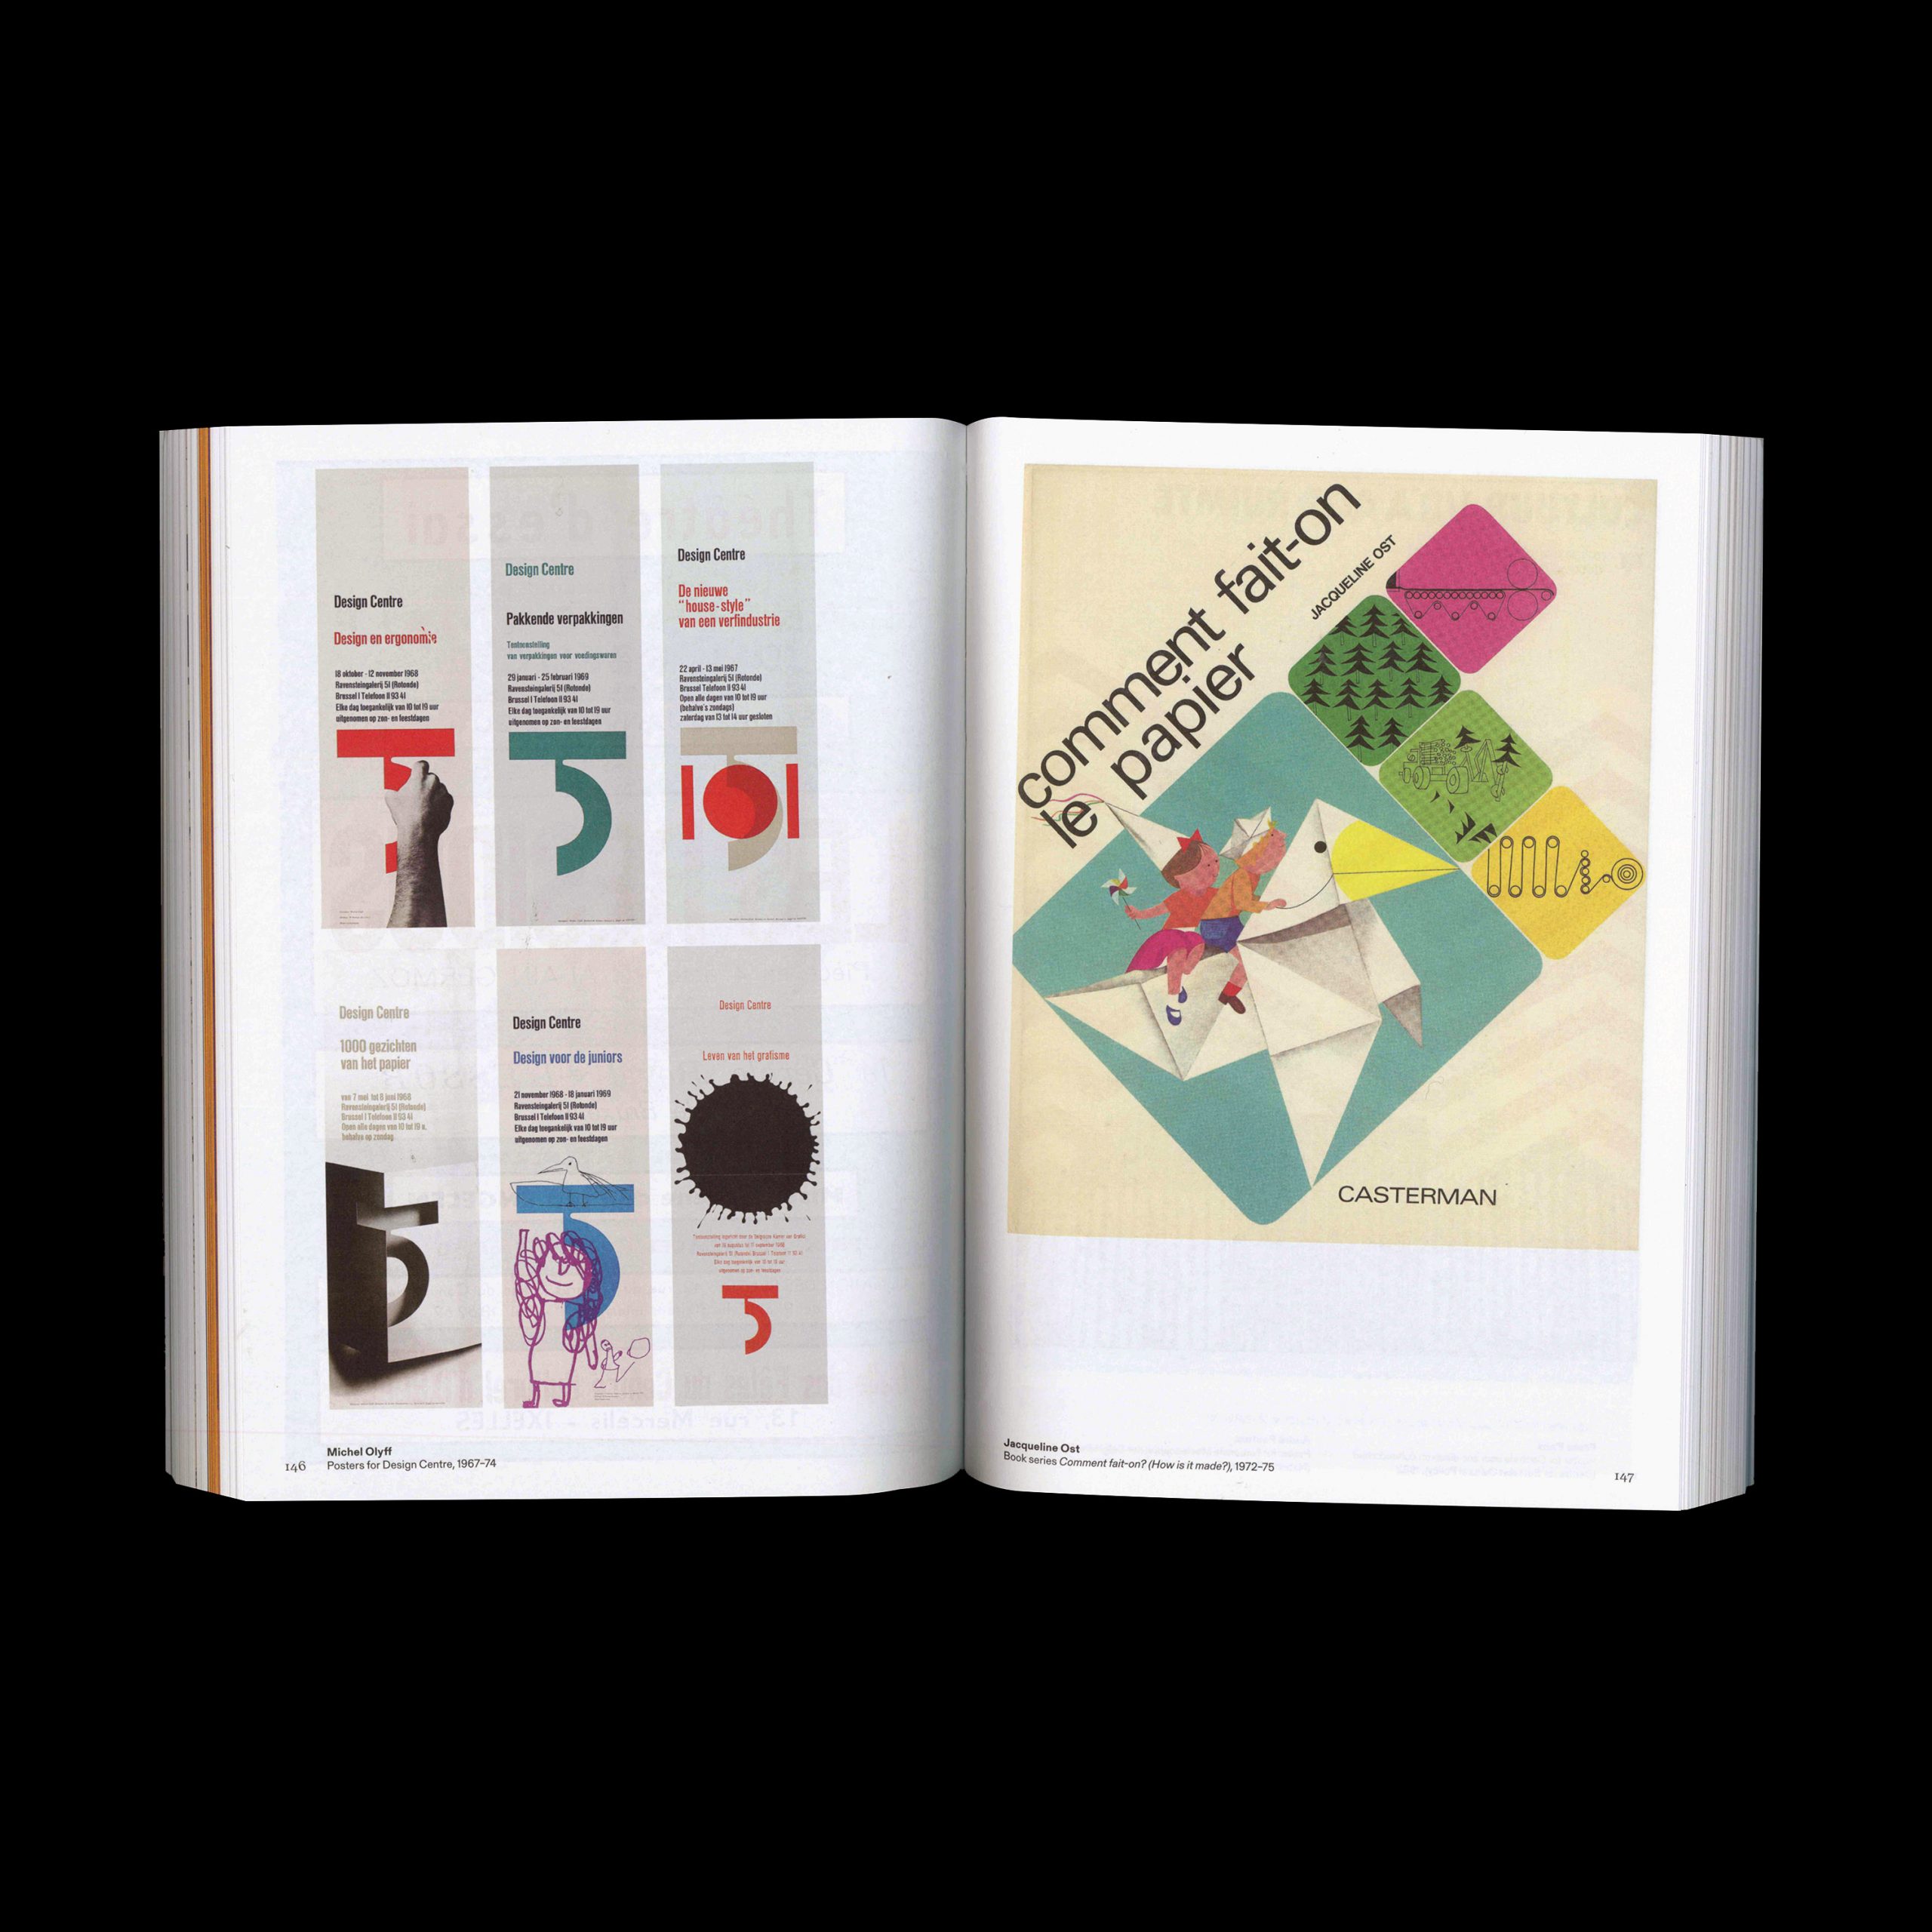 Off the Grid: Histories of Belgian graphic design, 2022